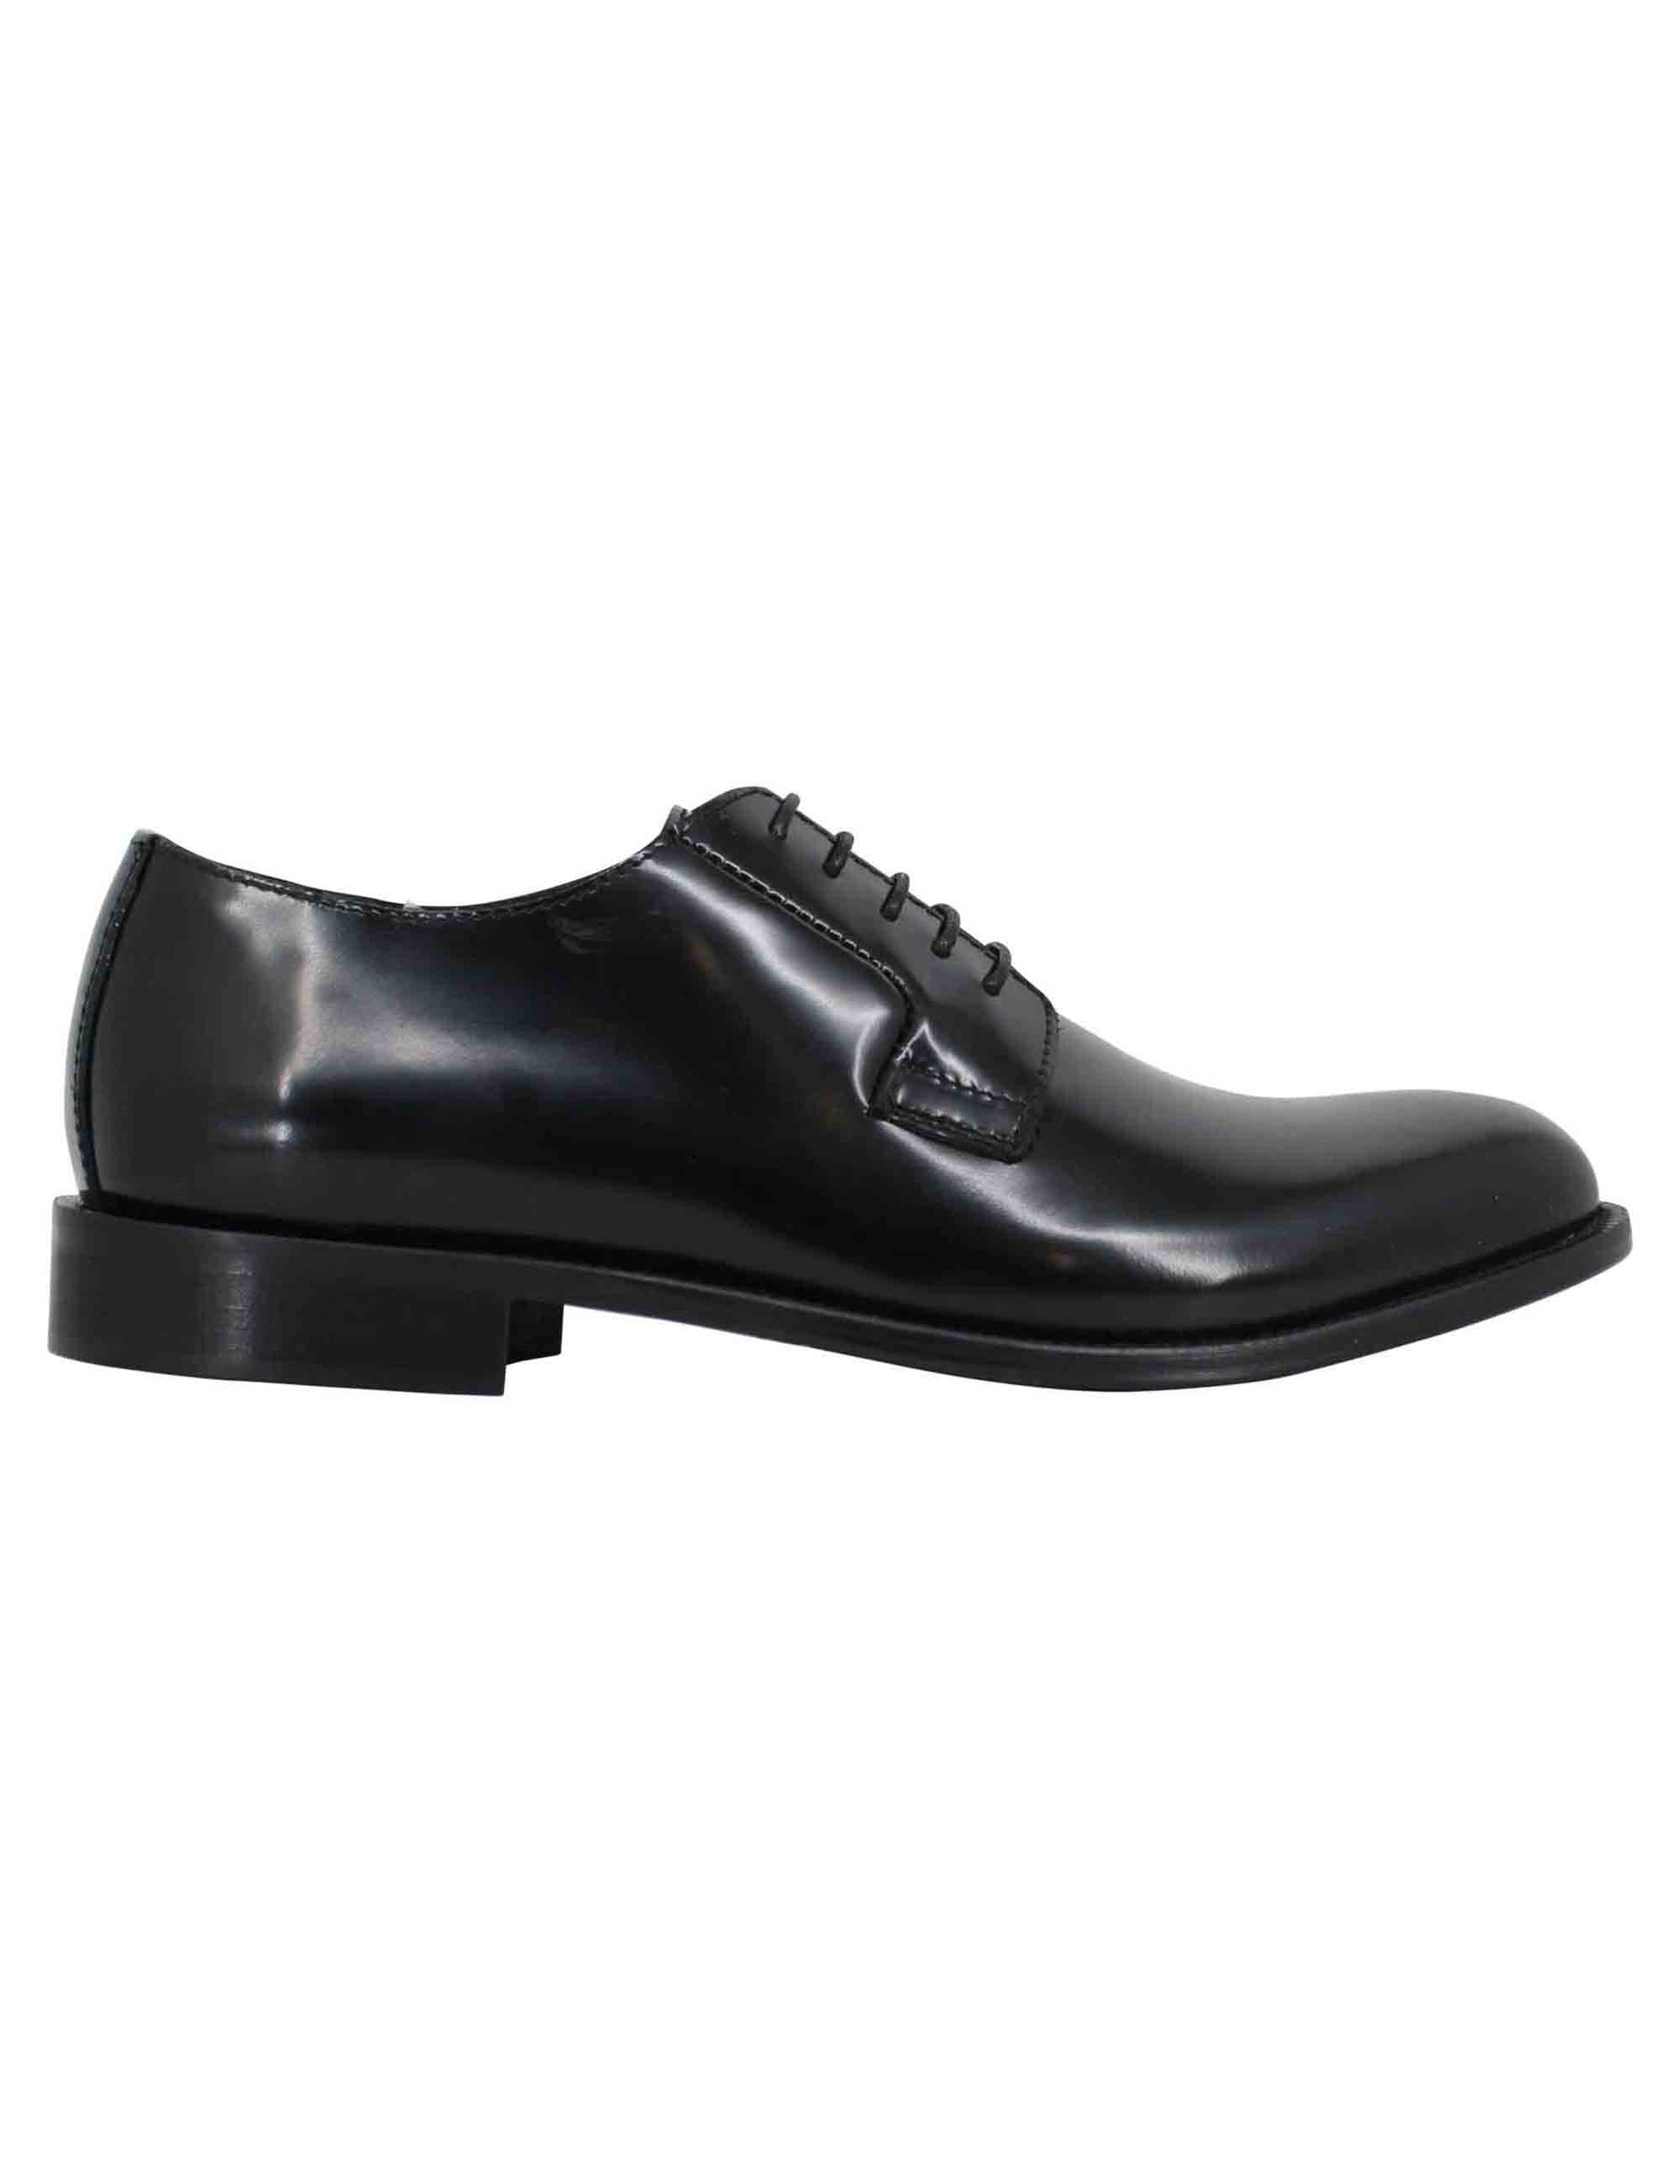 Men's black leather lace-ups with leather sole